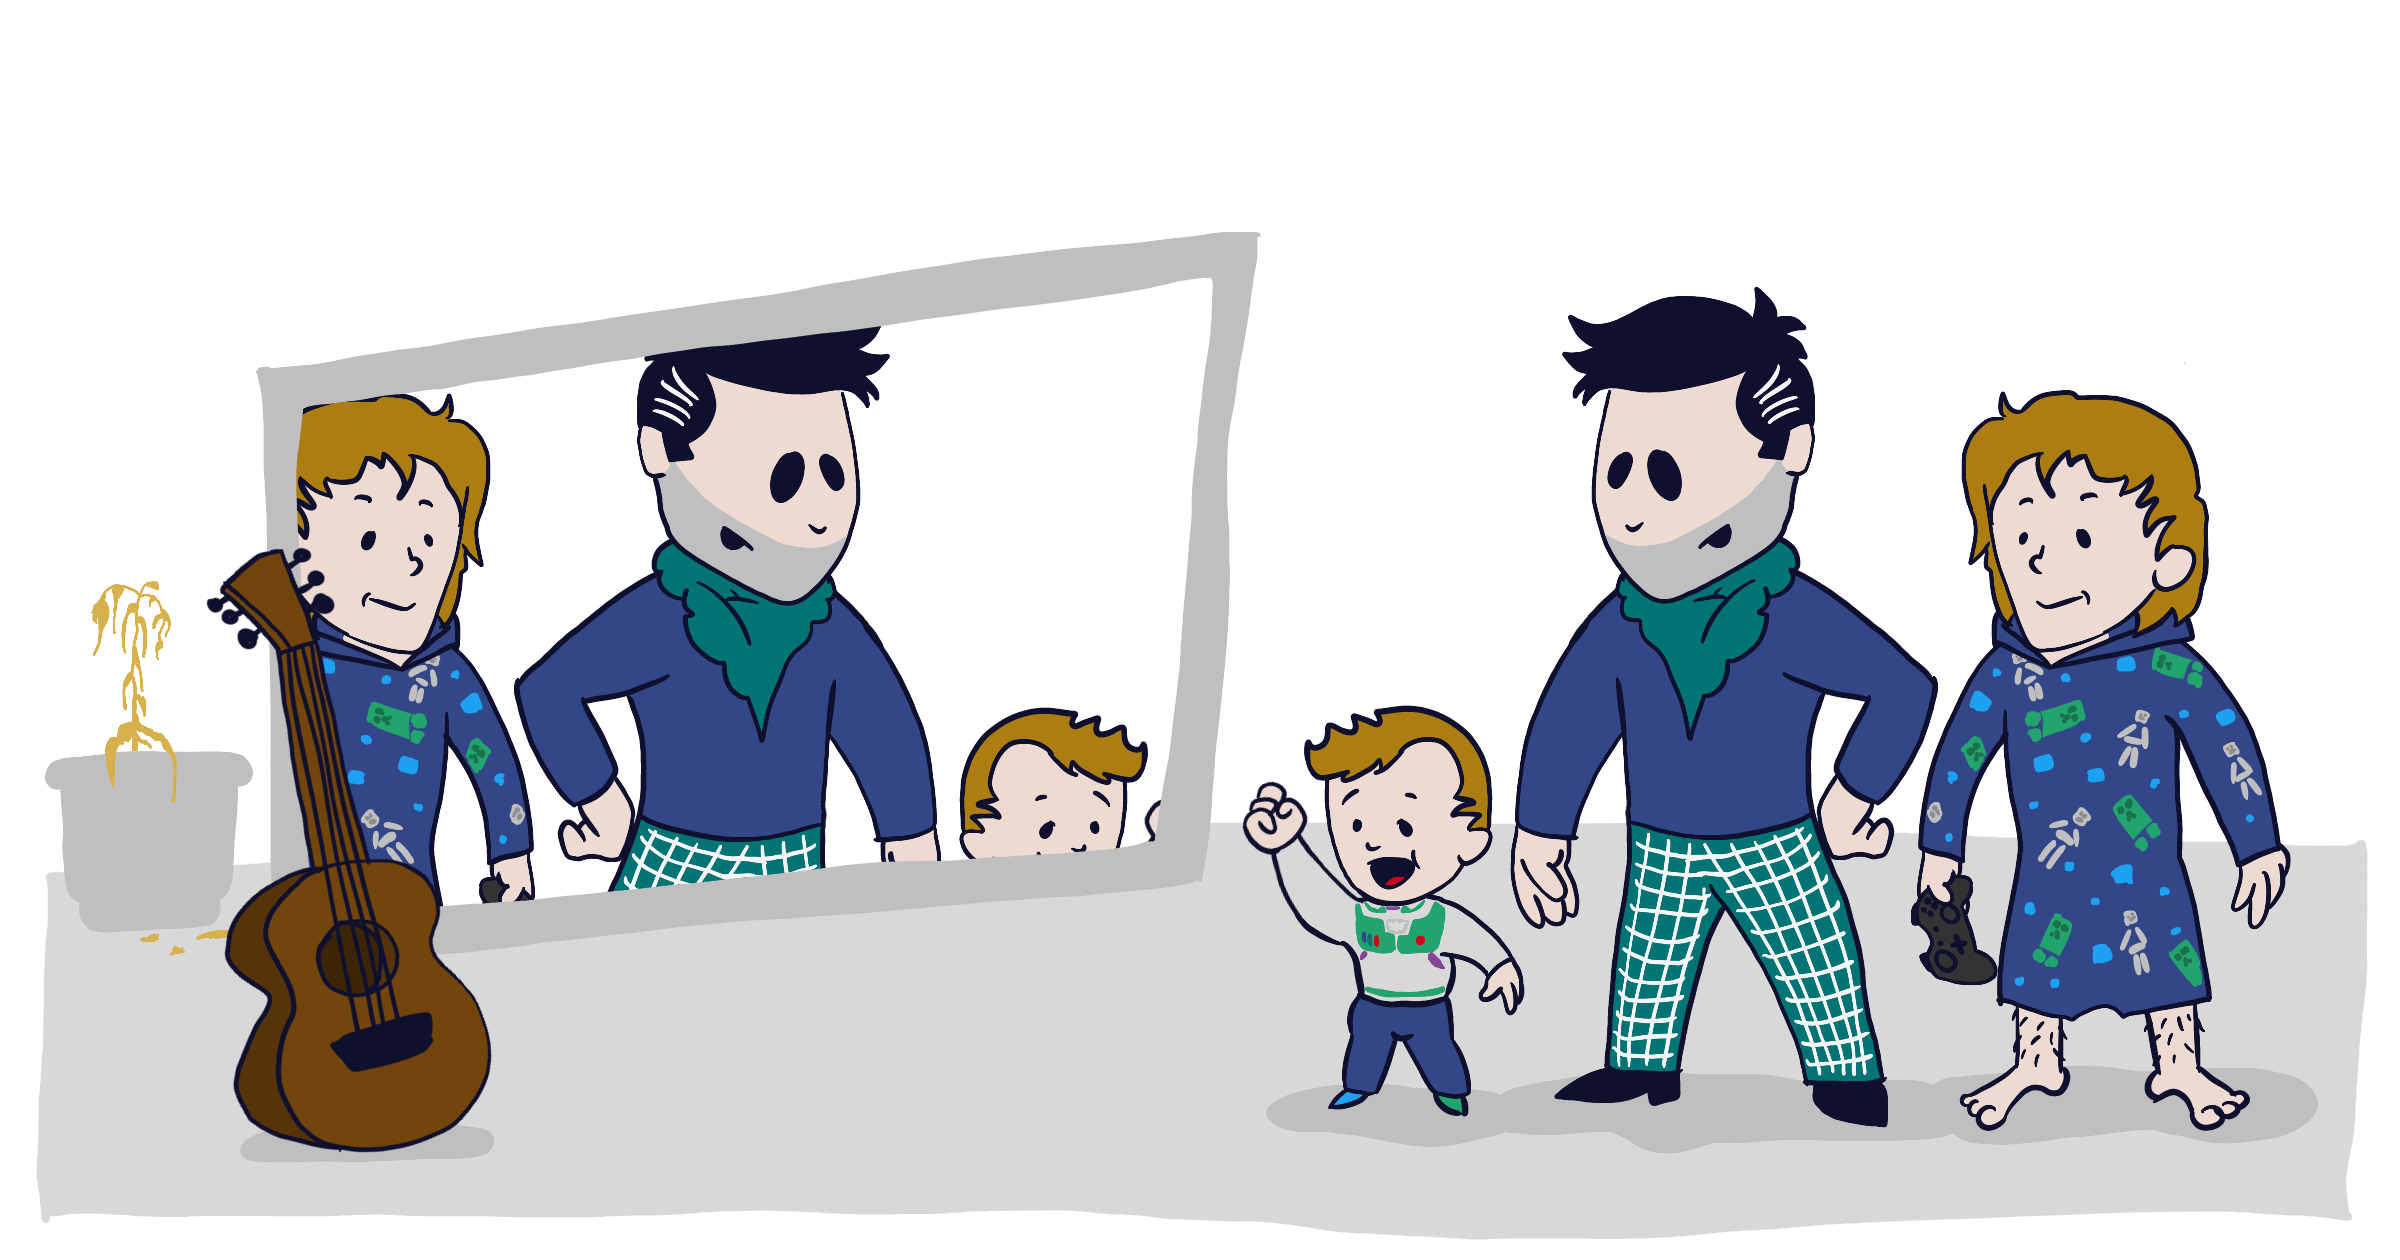 Carlos Eriksson as a Disney character, standing with a toddler and a teenager representing their children, looking themselves in the mirror.